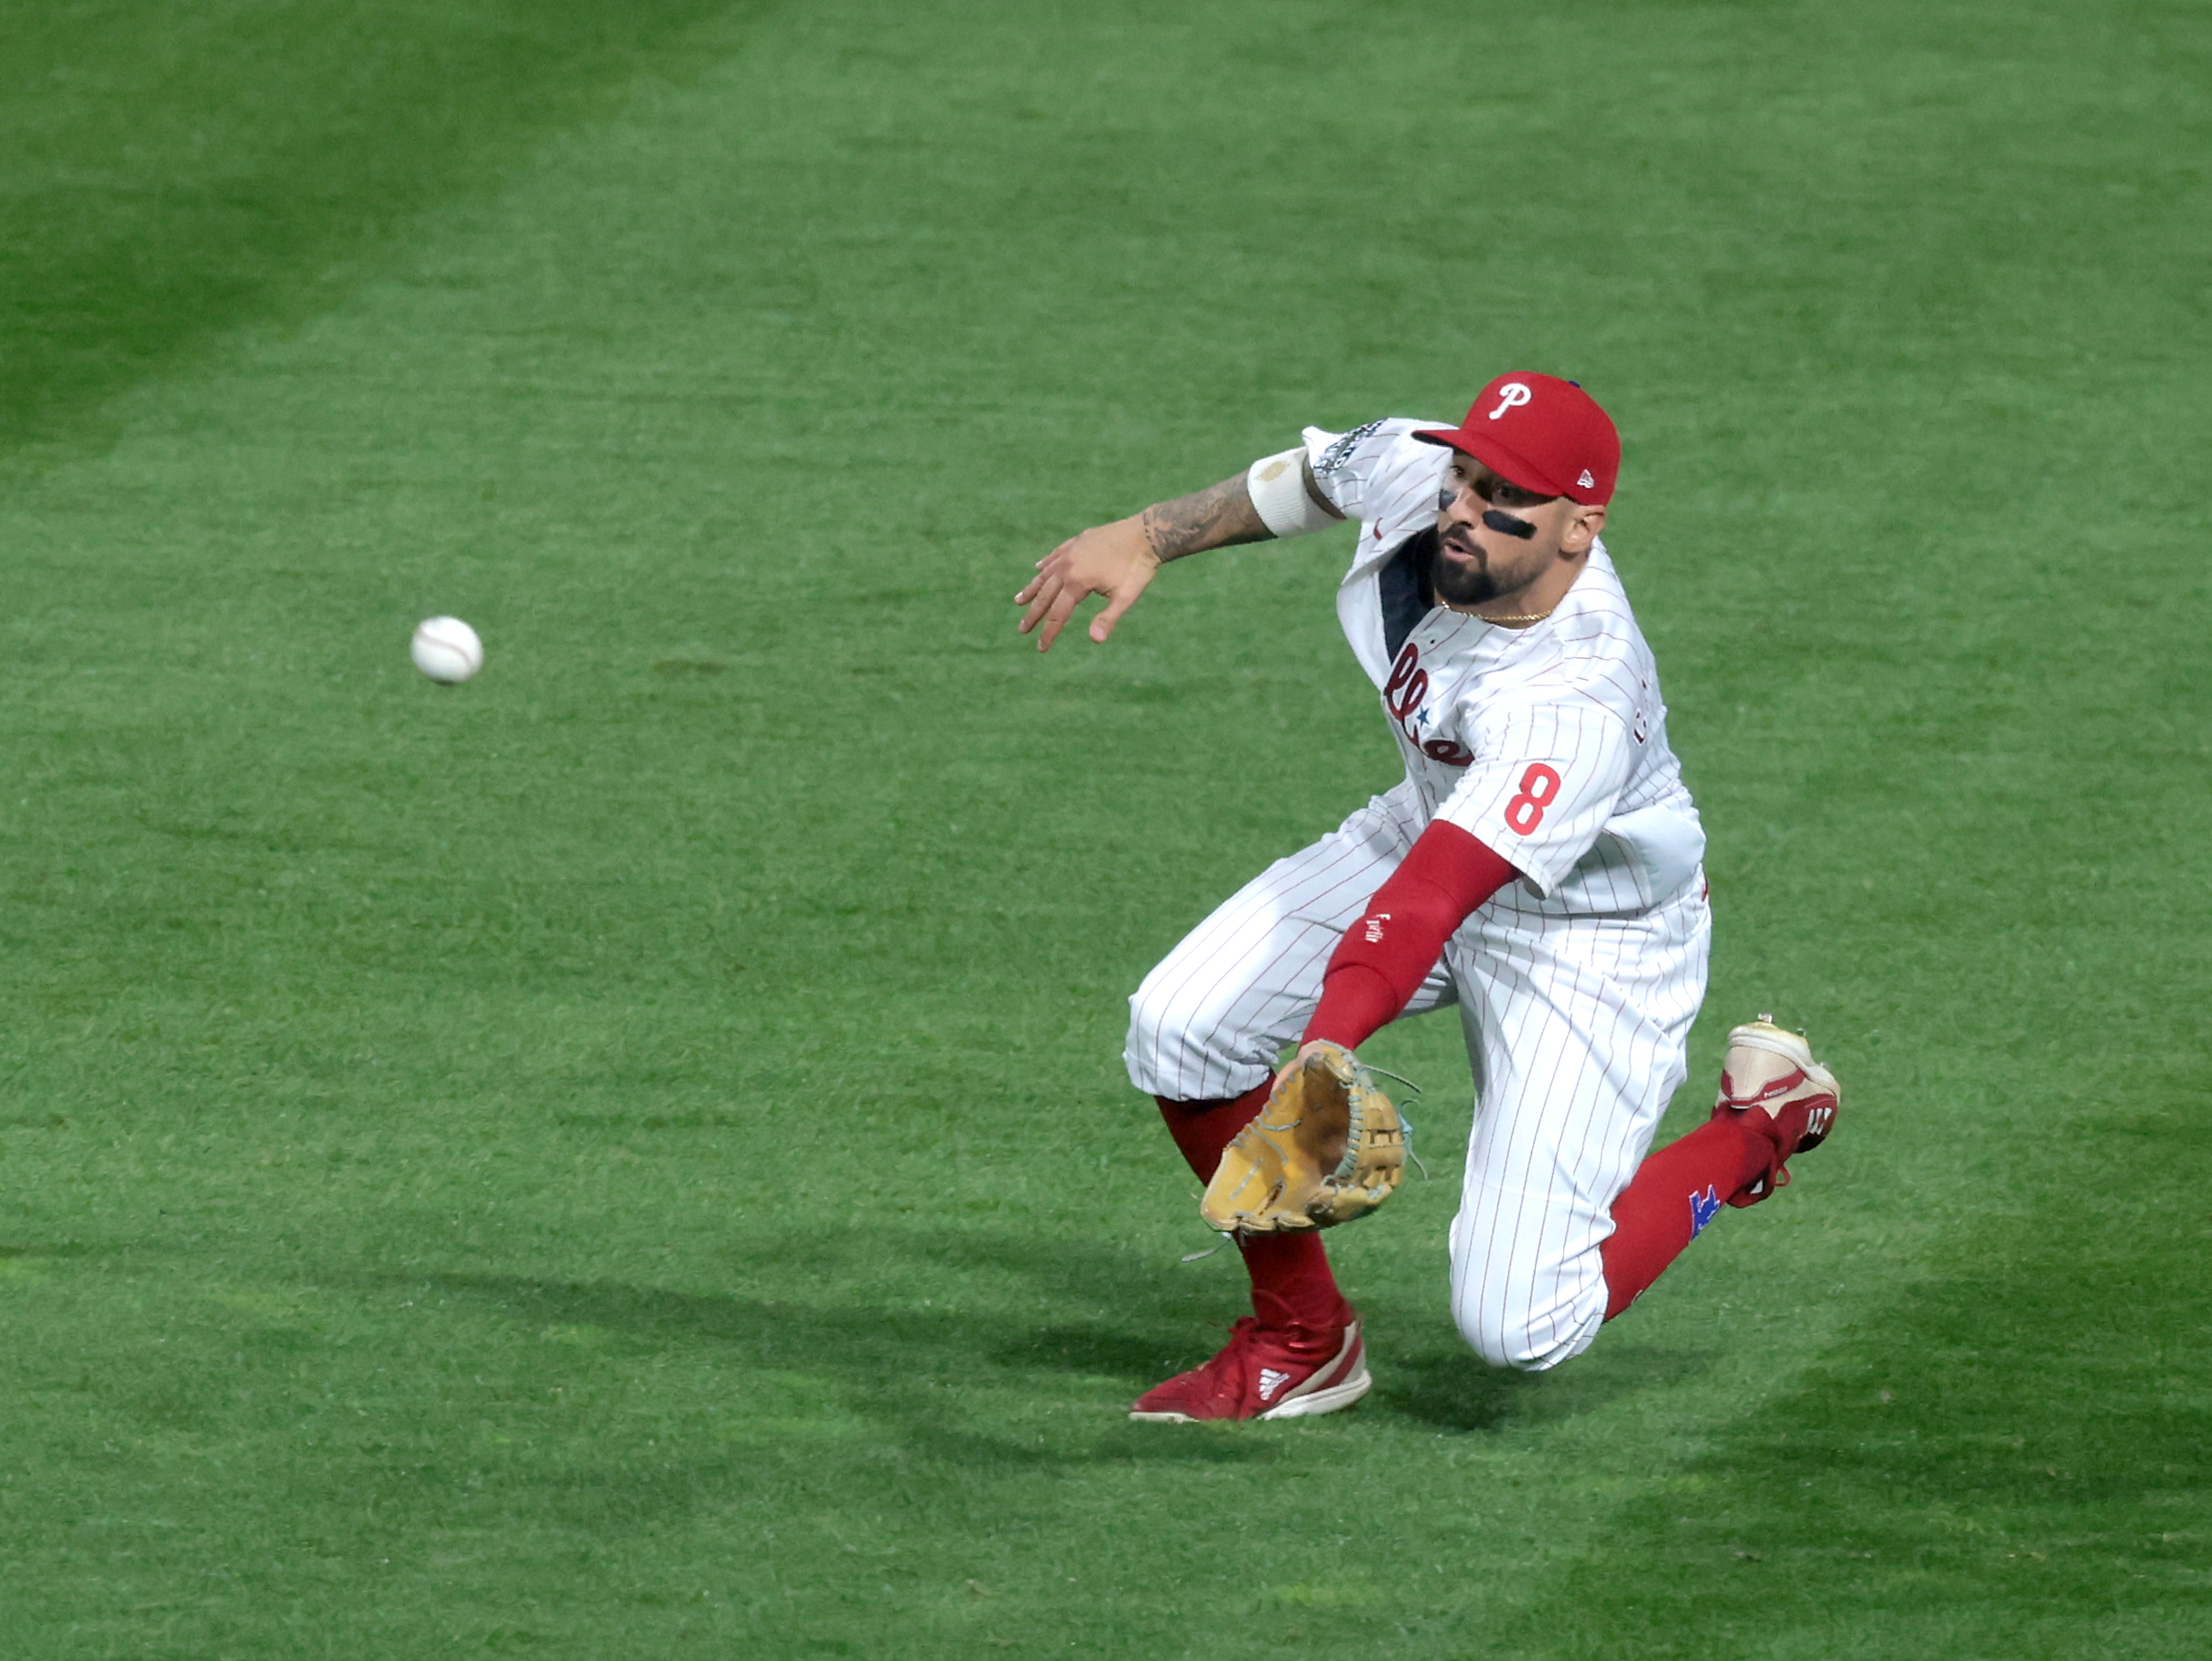 Nick Castellanos (8) of the Philadelphia Phillies makes a diving catch vs. the Houston Astros in the first inning during Game 3 of the World Series at Citizens Bank Park, Tuesday, Nov. 1 2022.